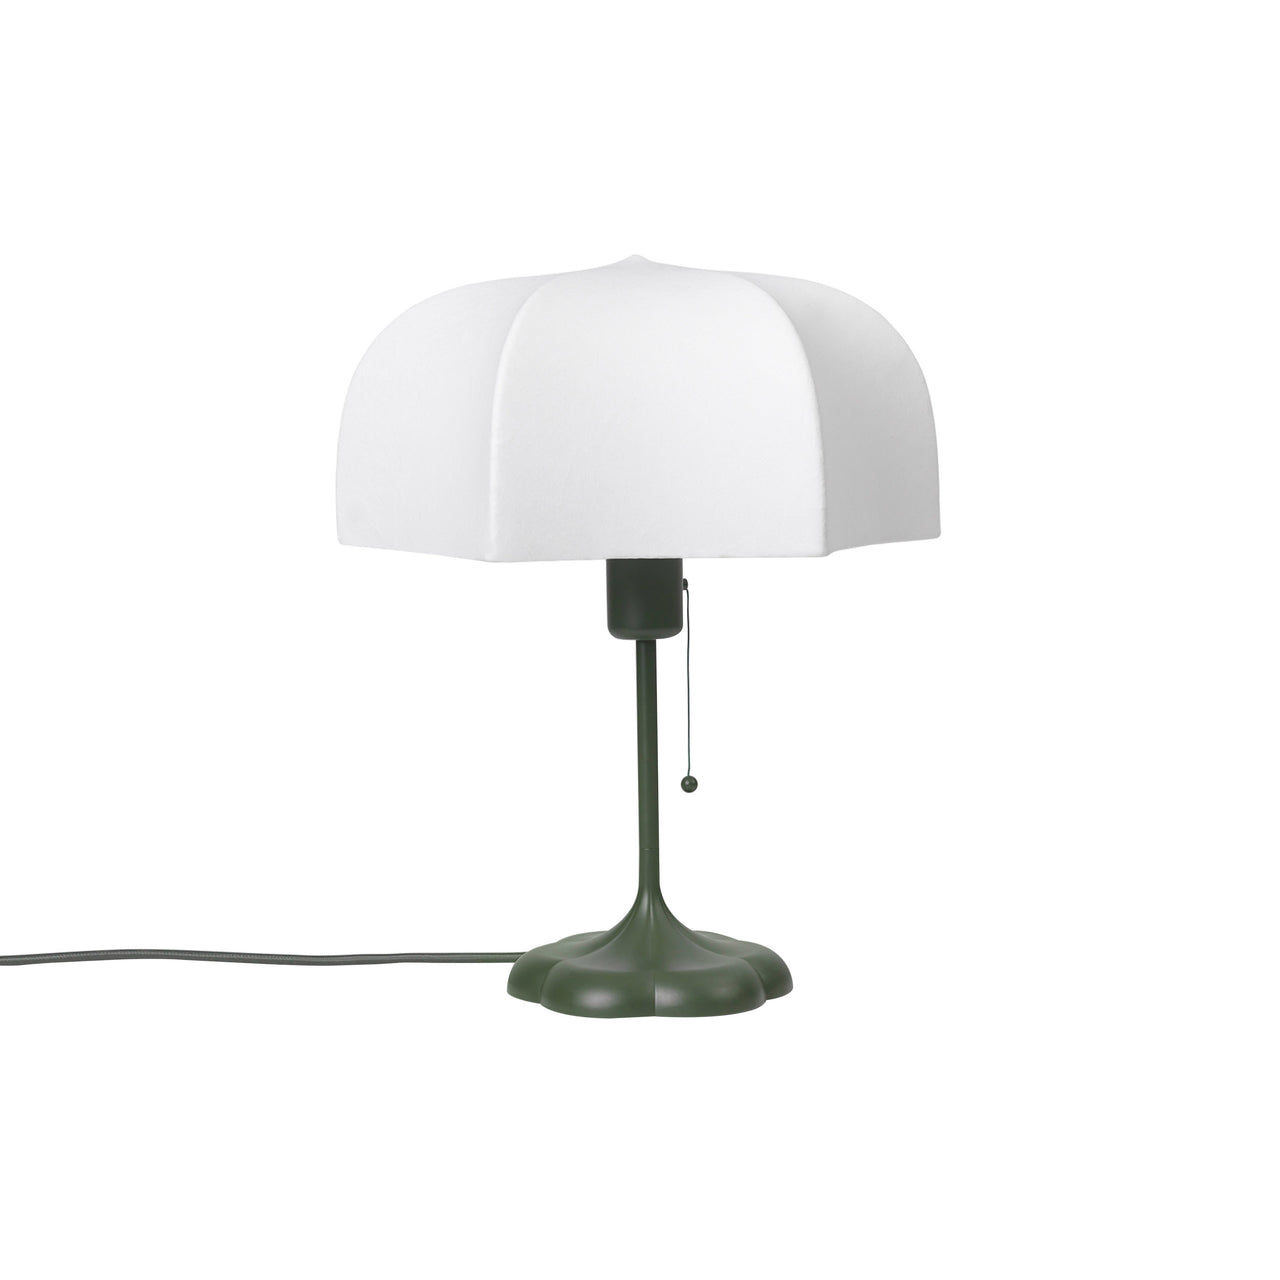 Poem Table Lamp: Grass Green